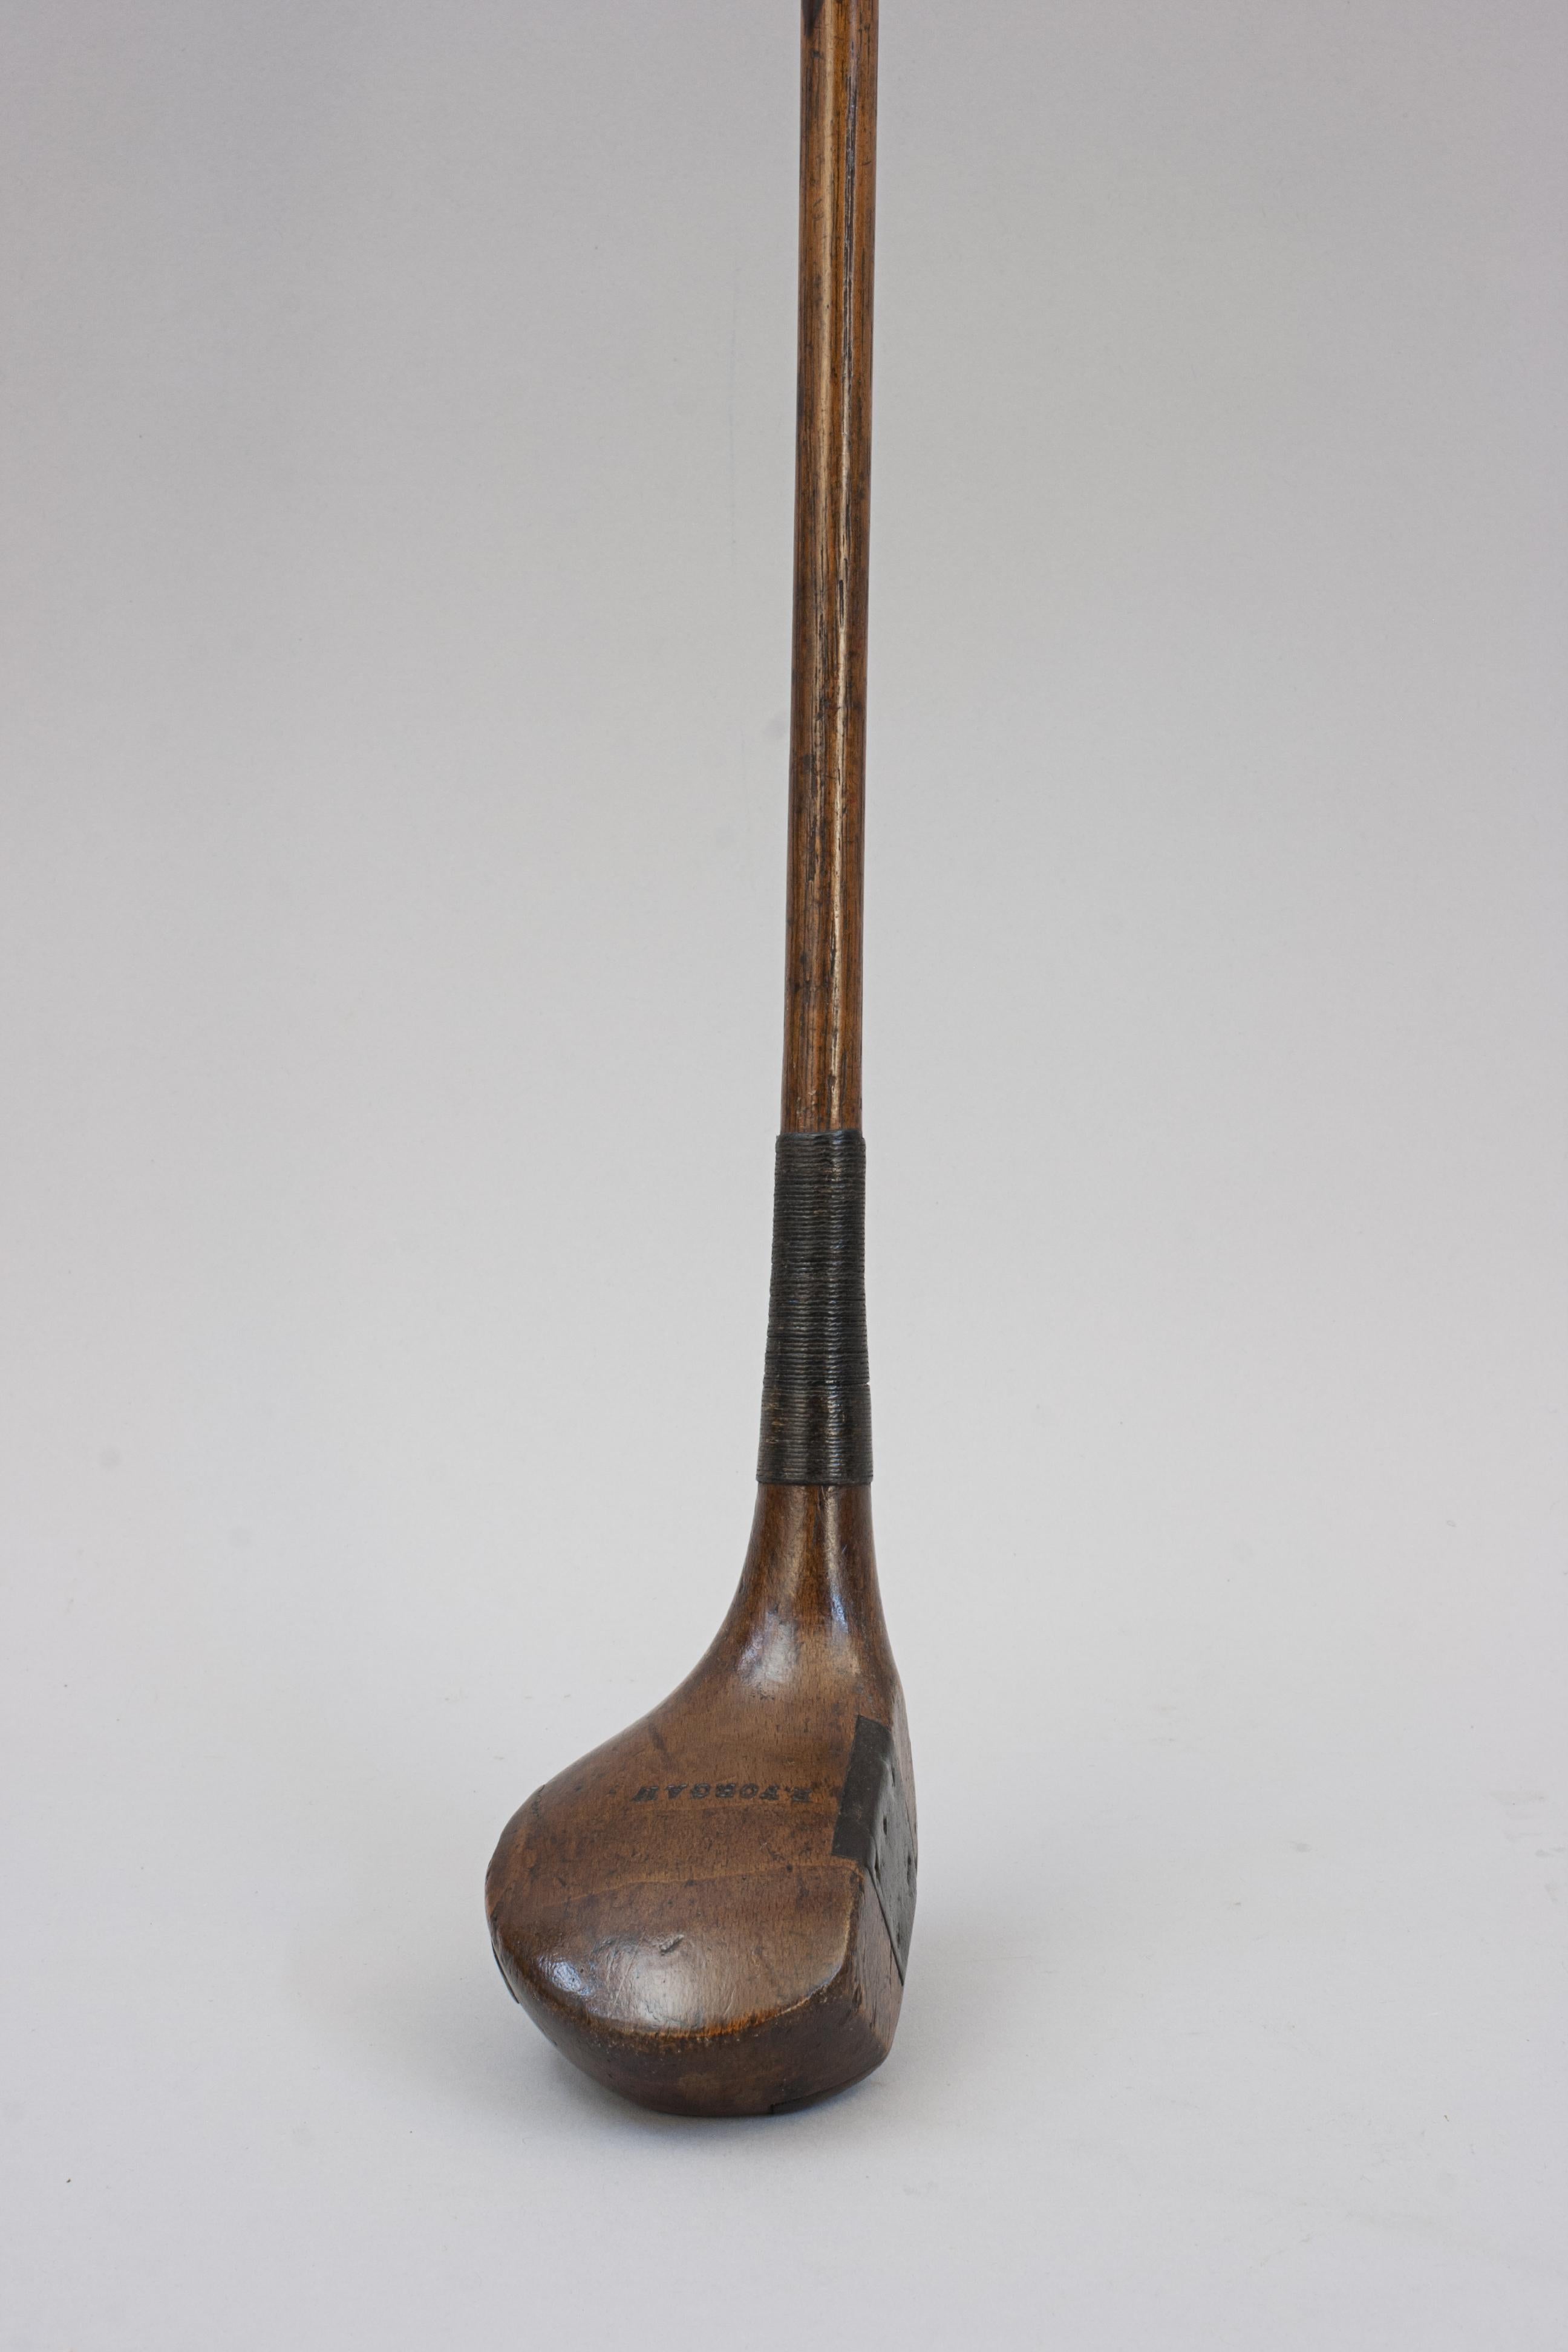 persimmon wood golf clubs